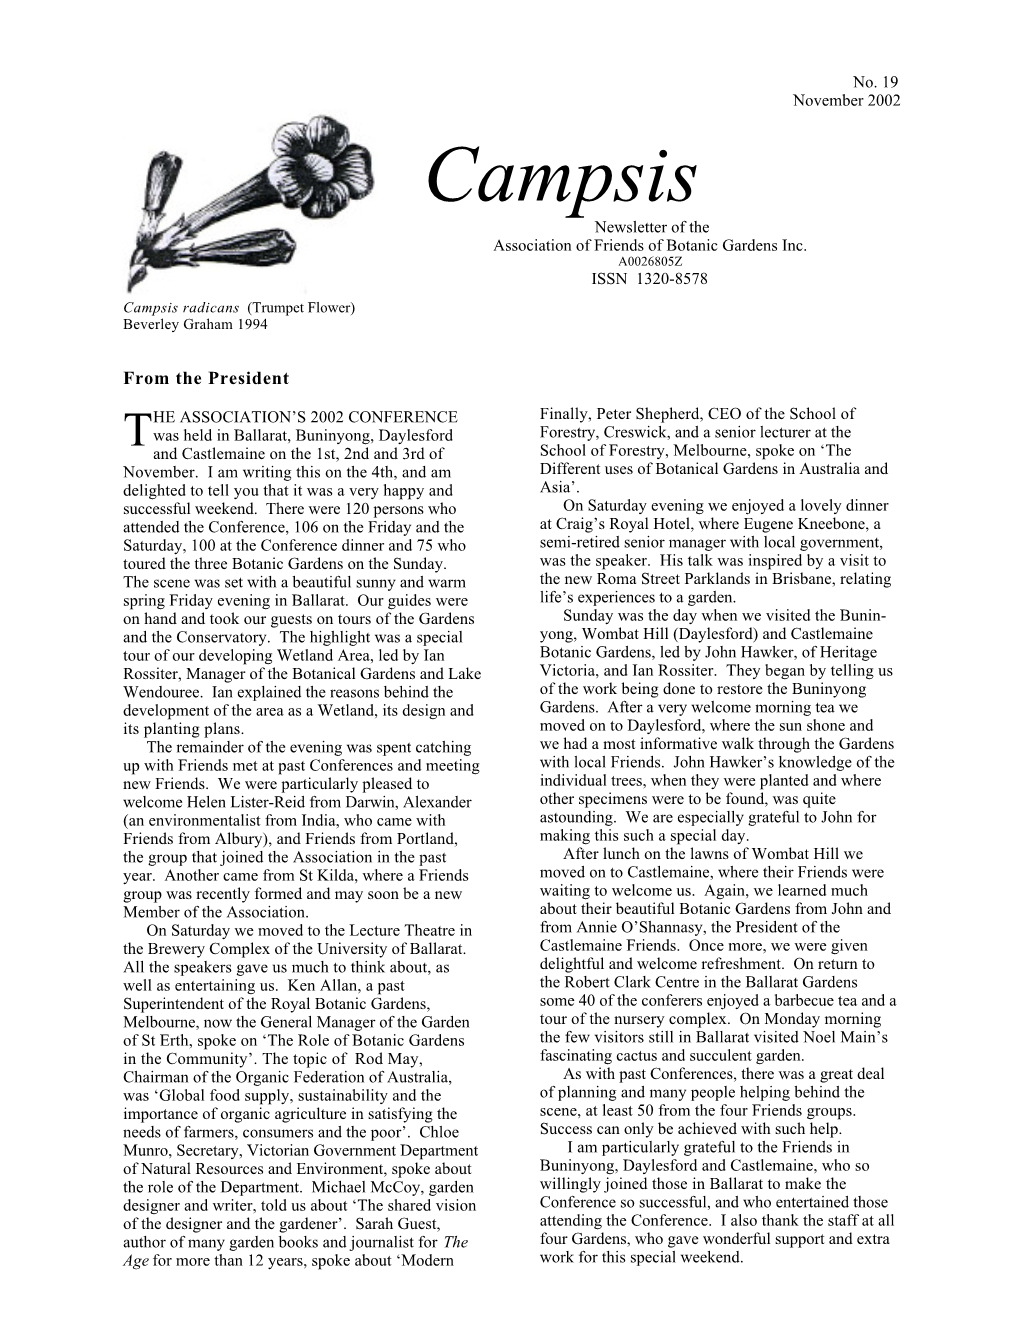 Campsis Newsletter No. 19